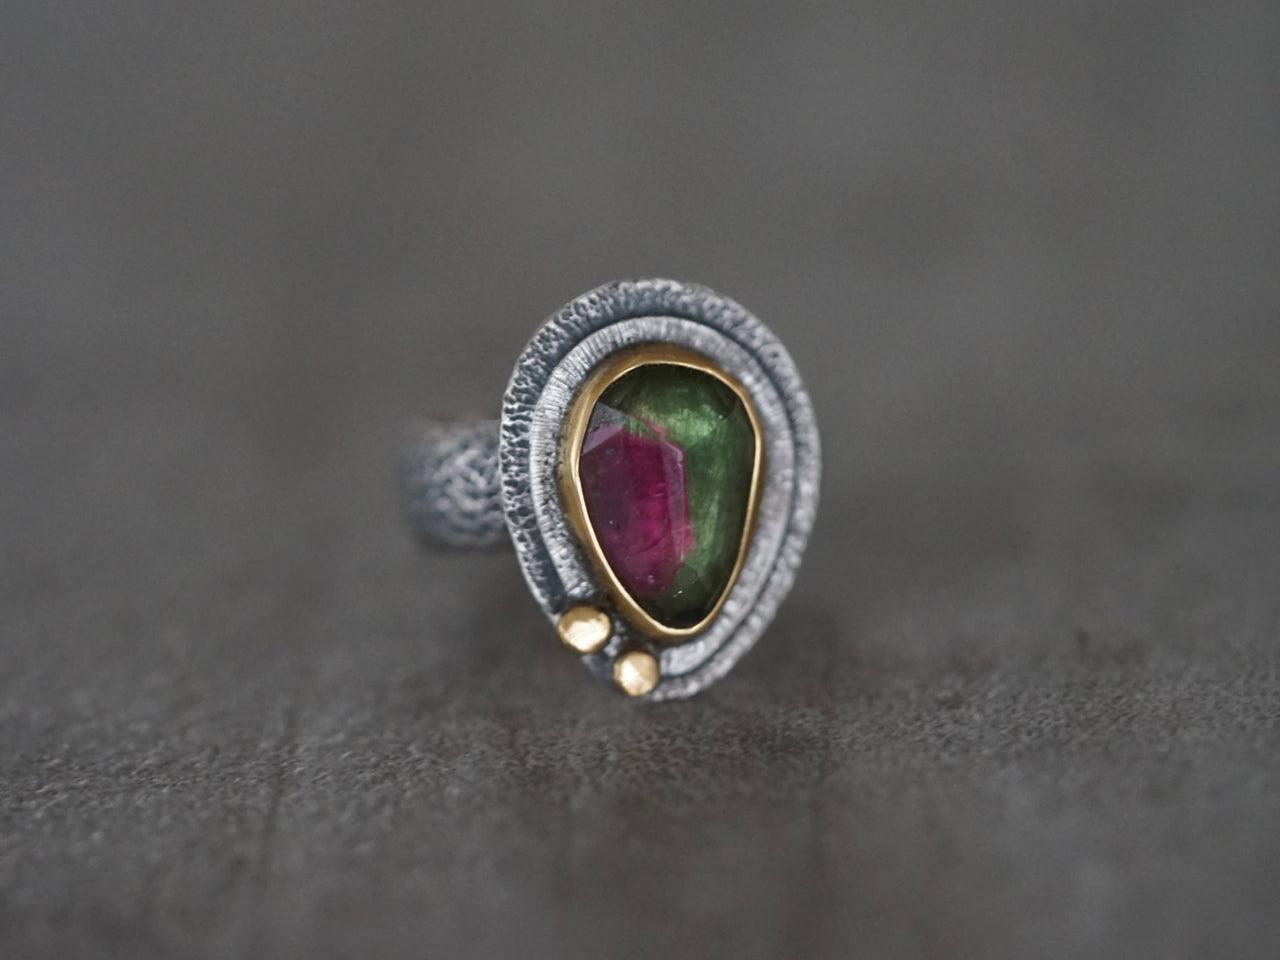 RESERVED bicoloured Tourmaline and 22k gold ring, size 6